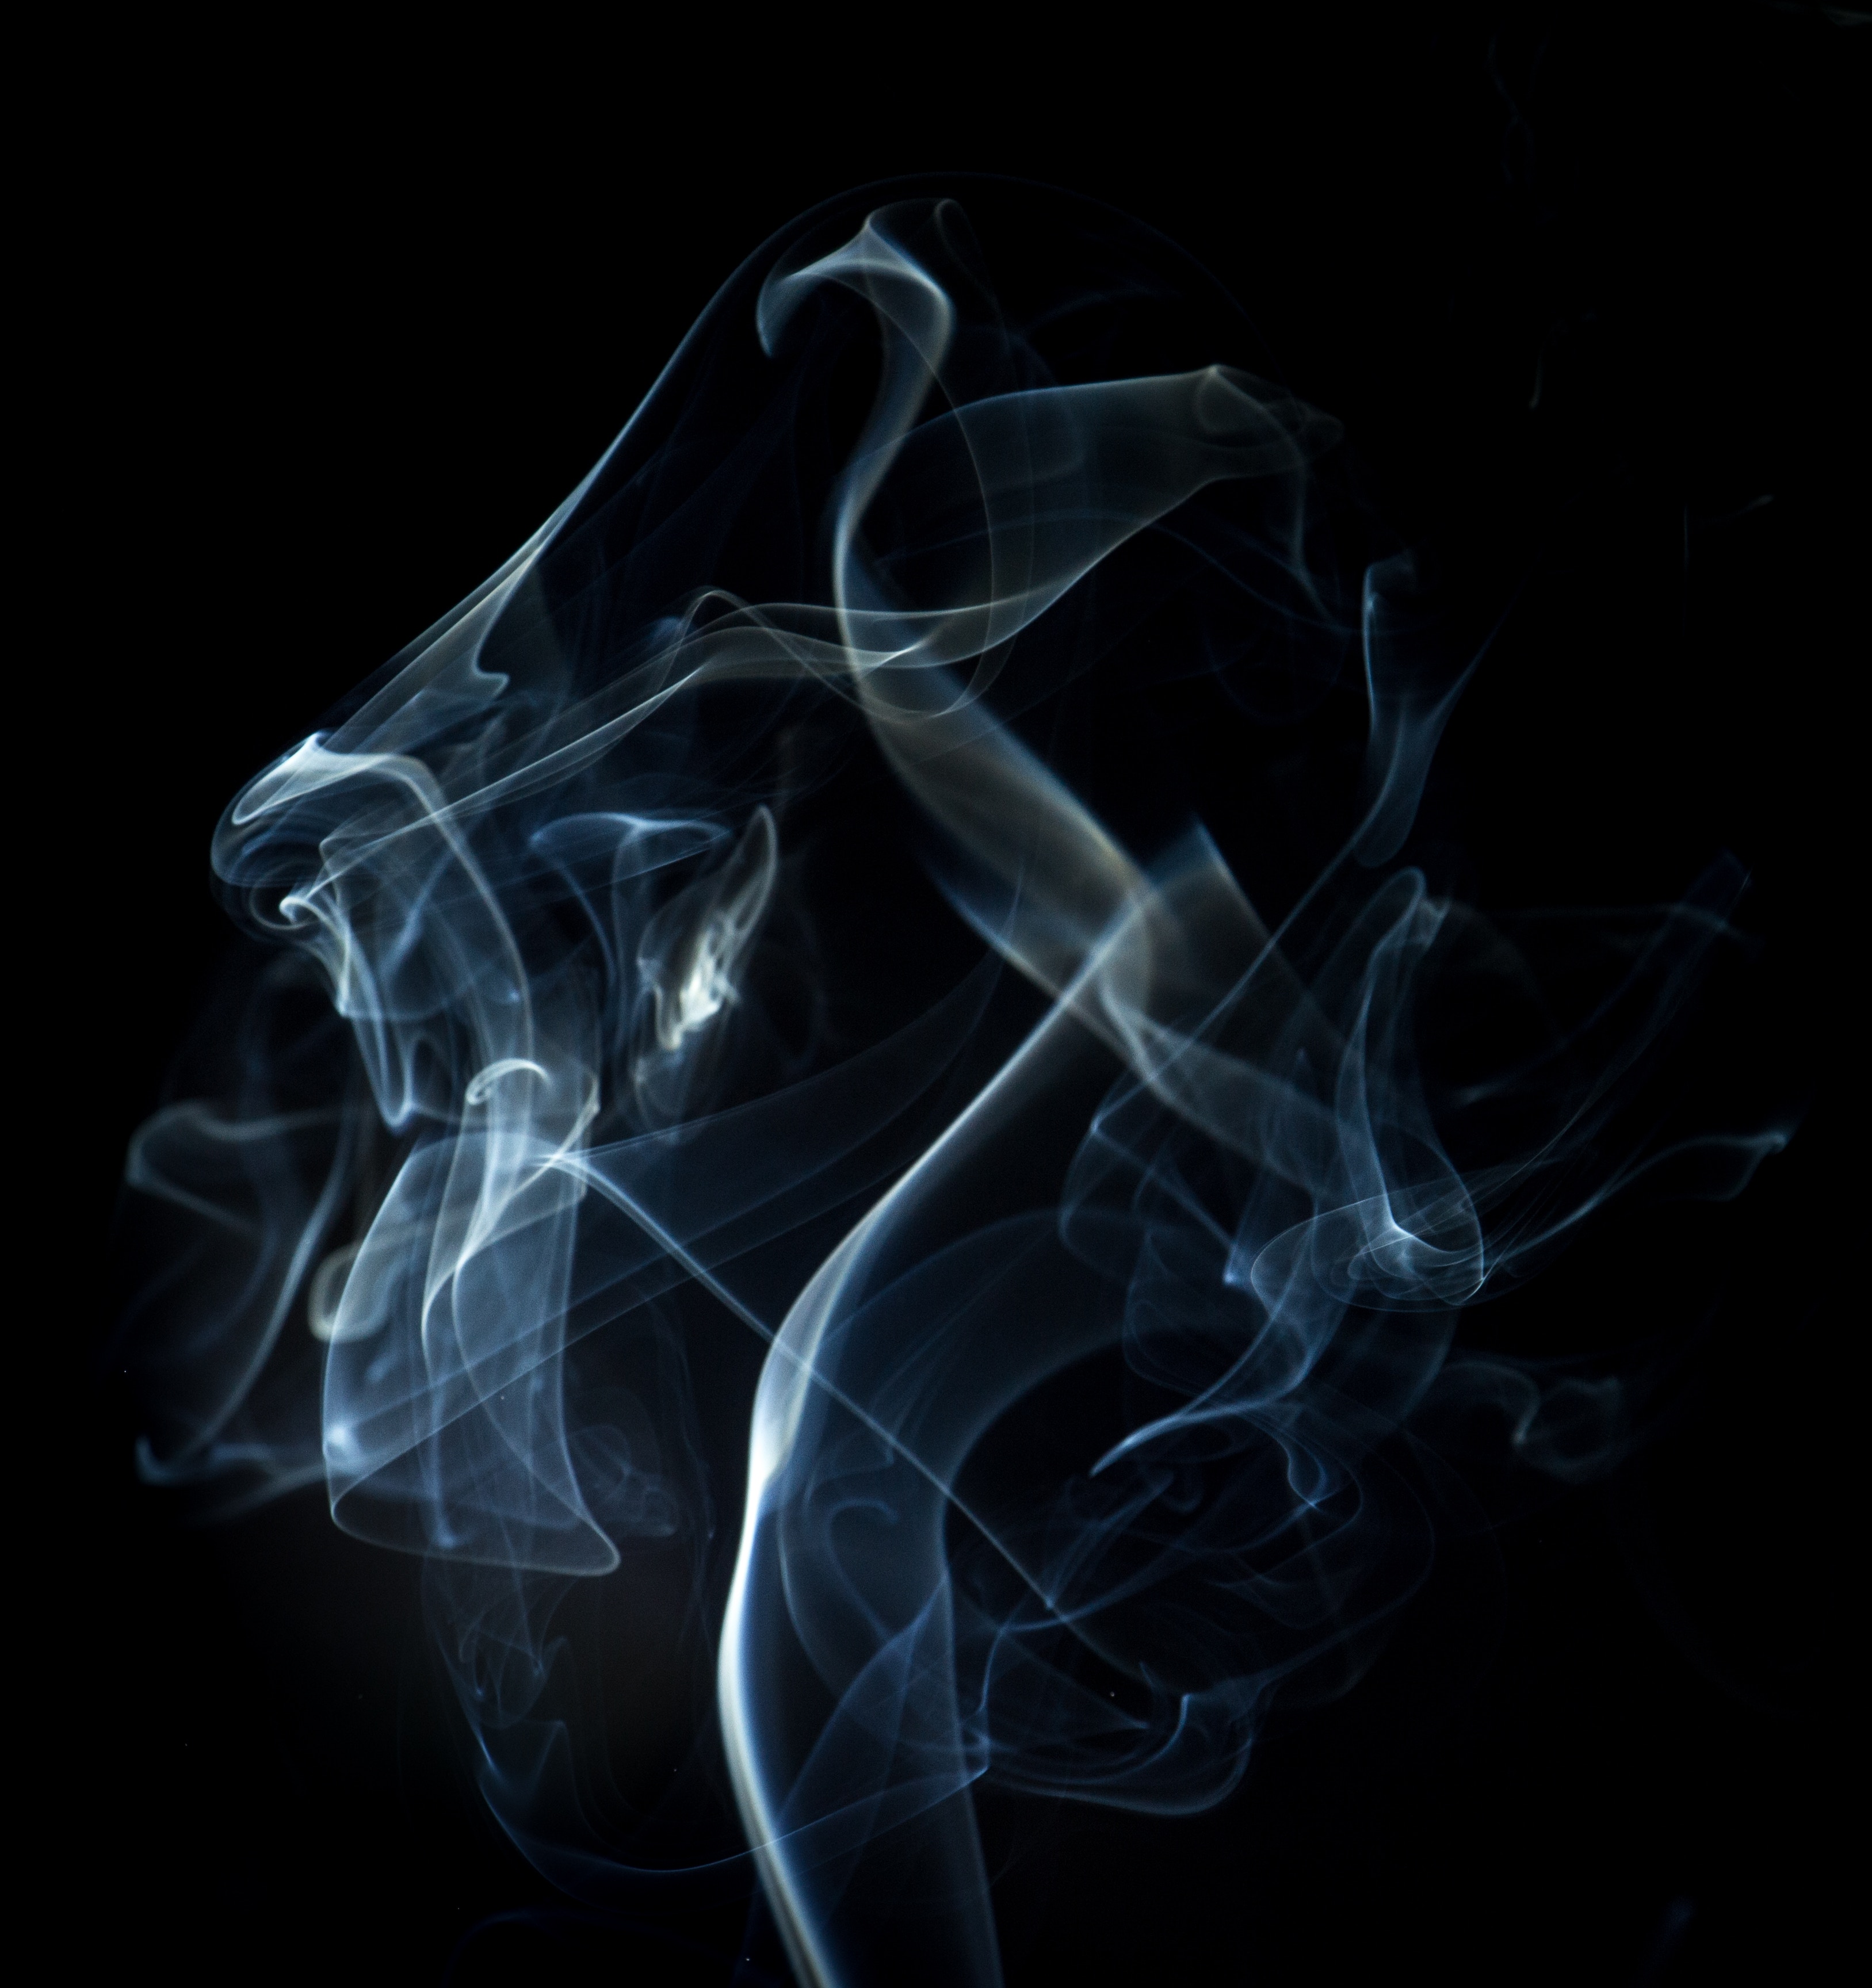 119312 Screensavers and Wallpapers Lines for phone. Download lines, abstract, smoke, dark background, shroud pictures for free